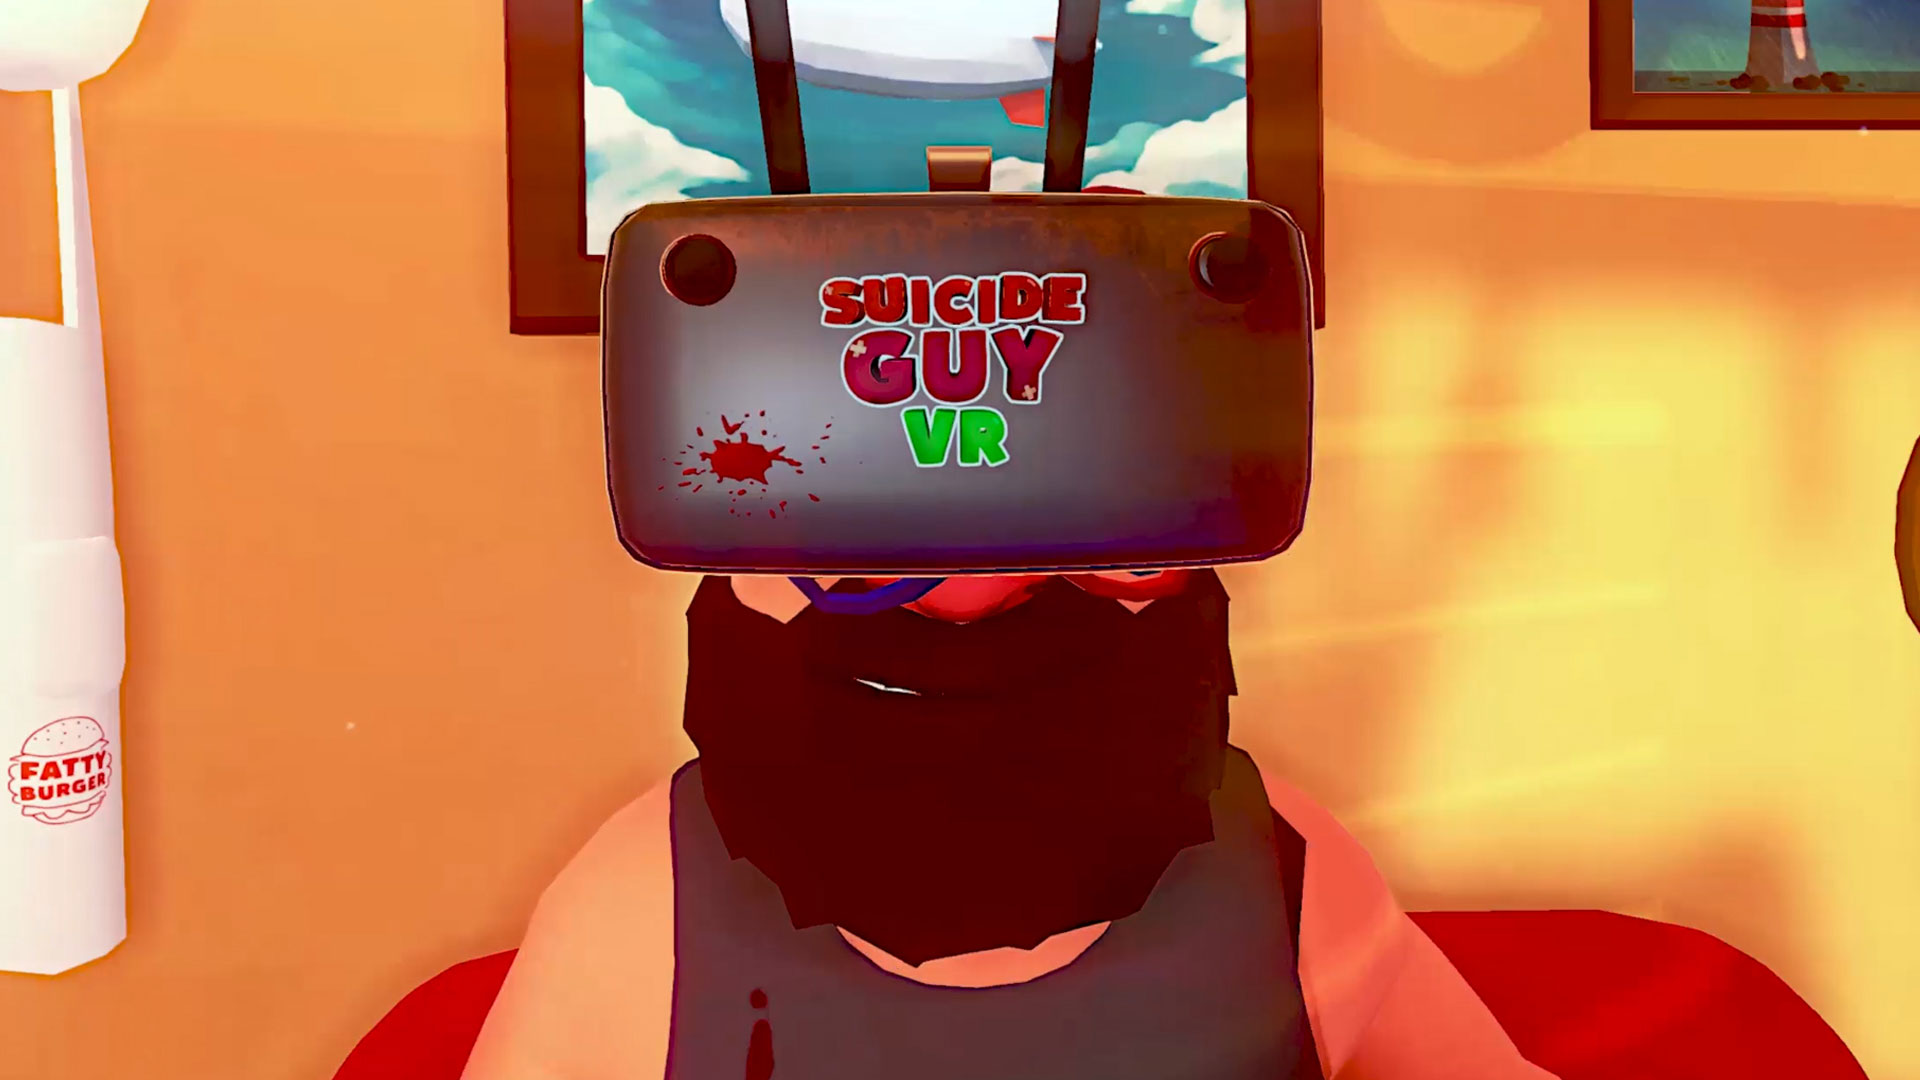 Suicide guy steam фото 17